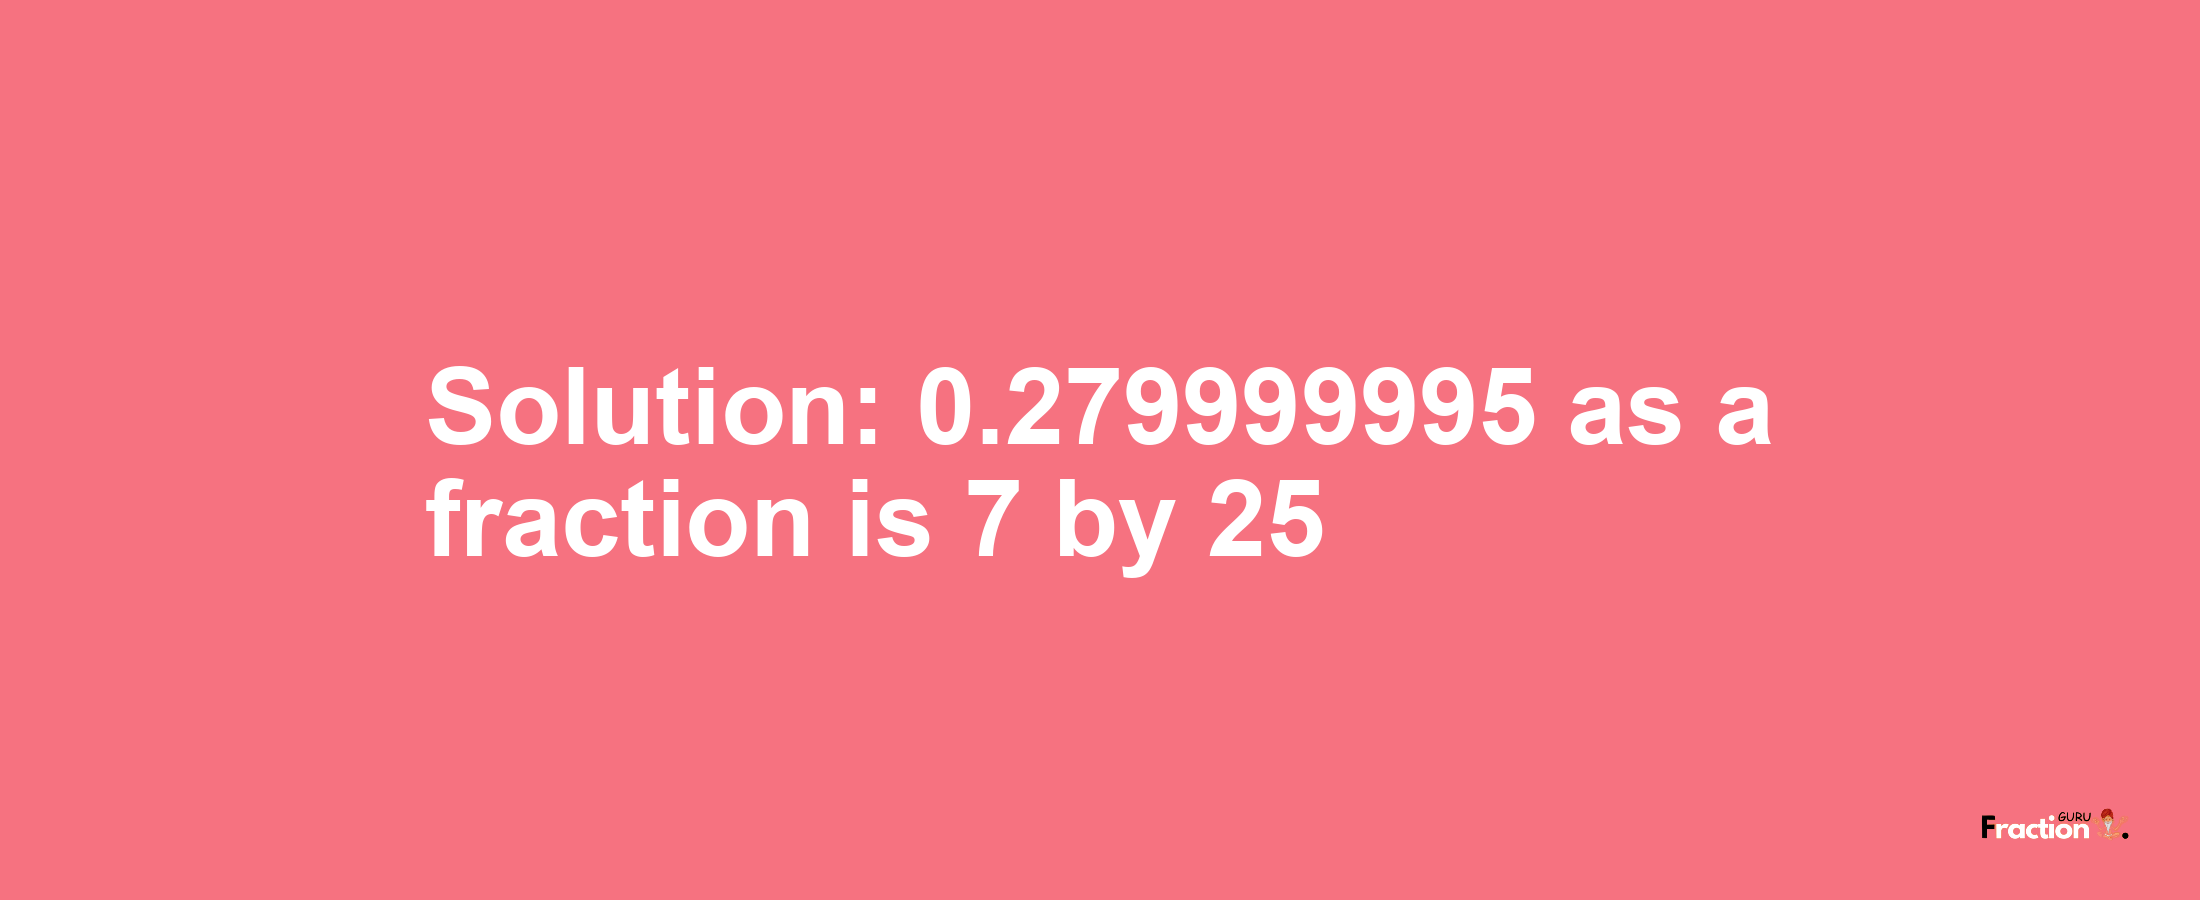 Solution:0.279999995 as a fraction is 7/25